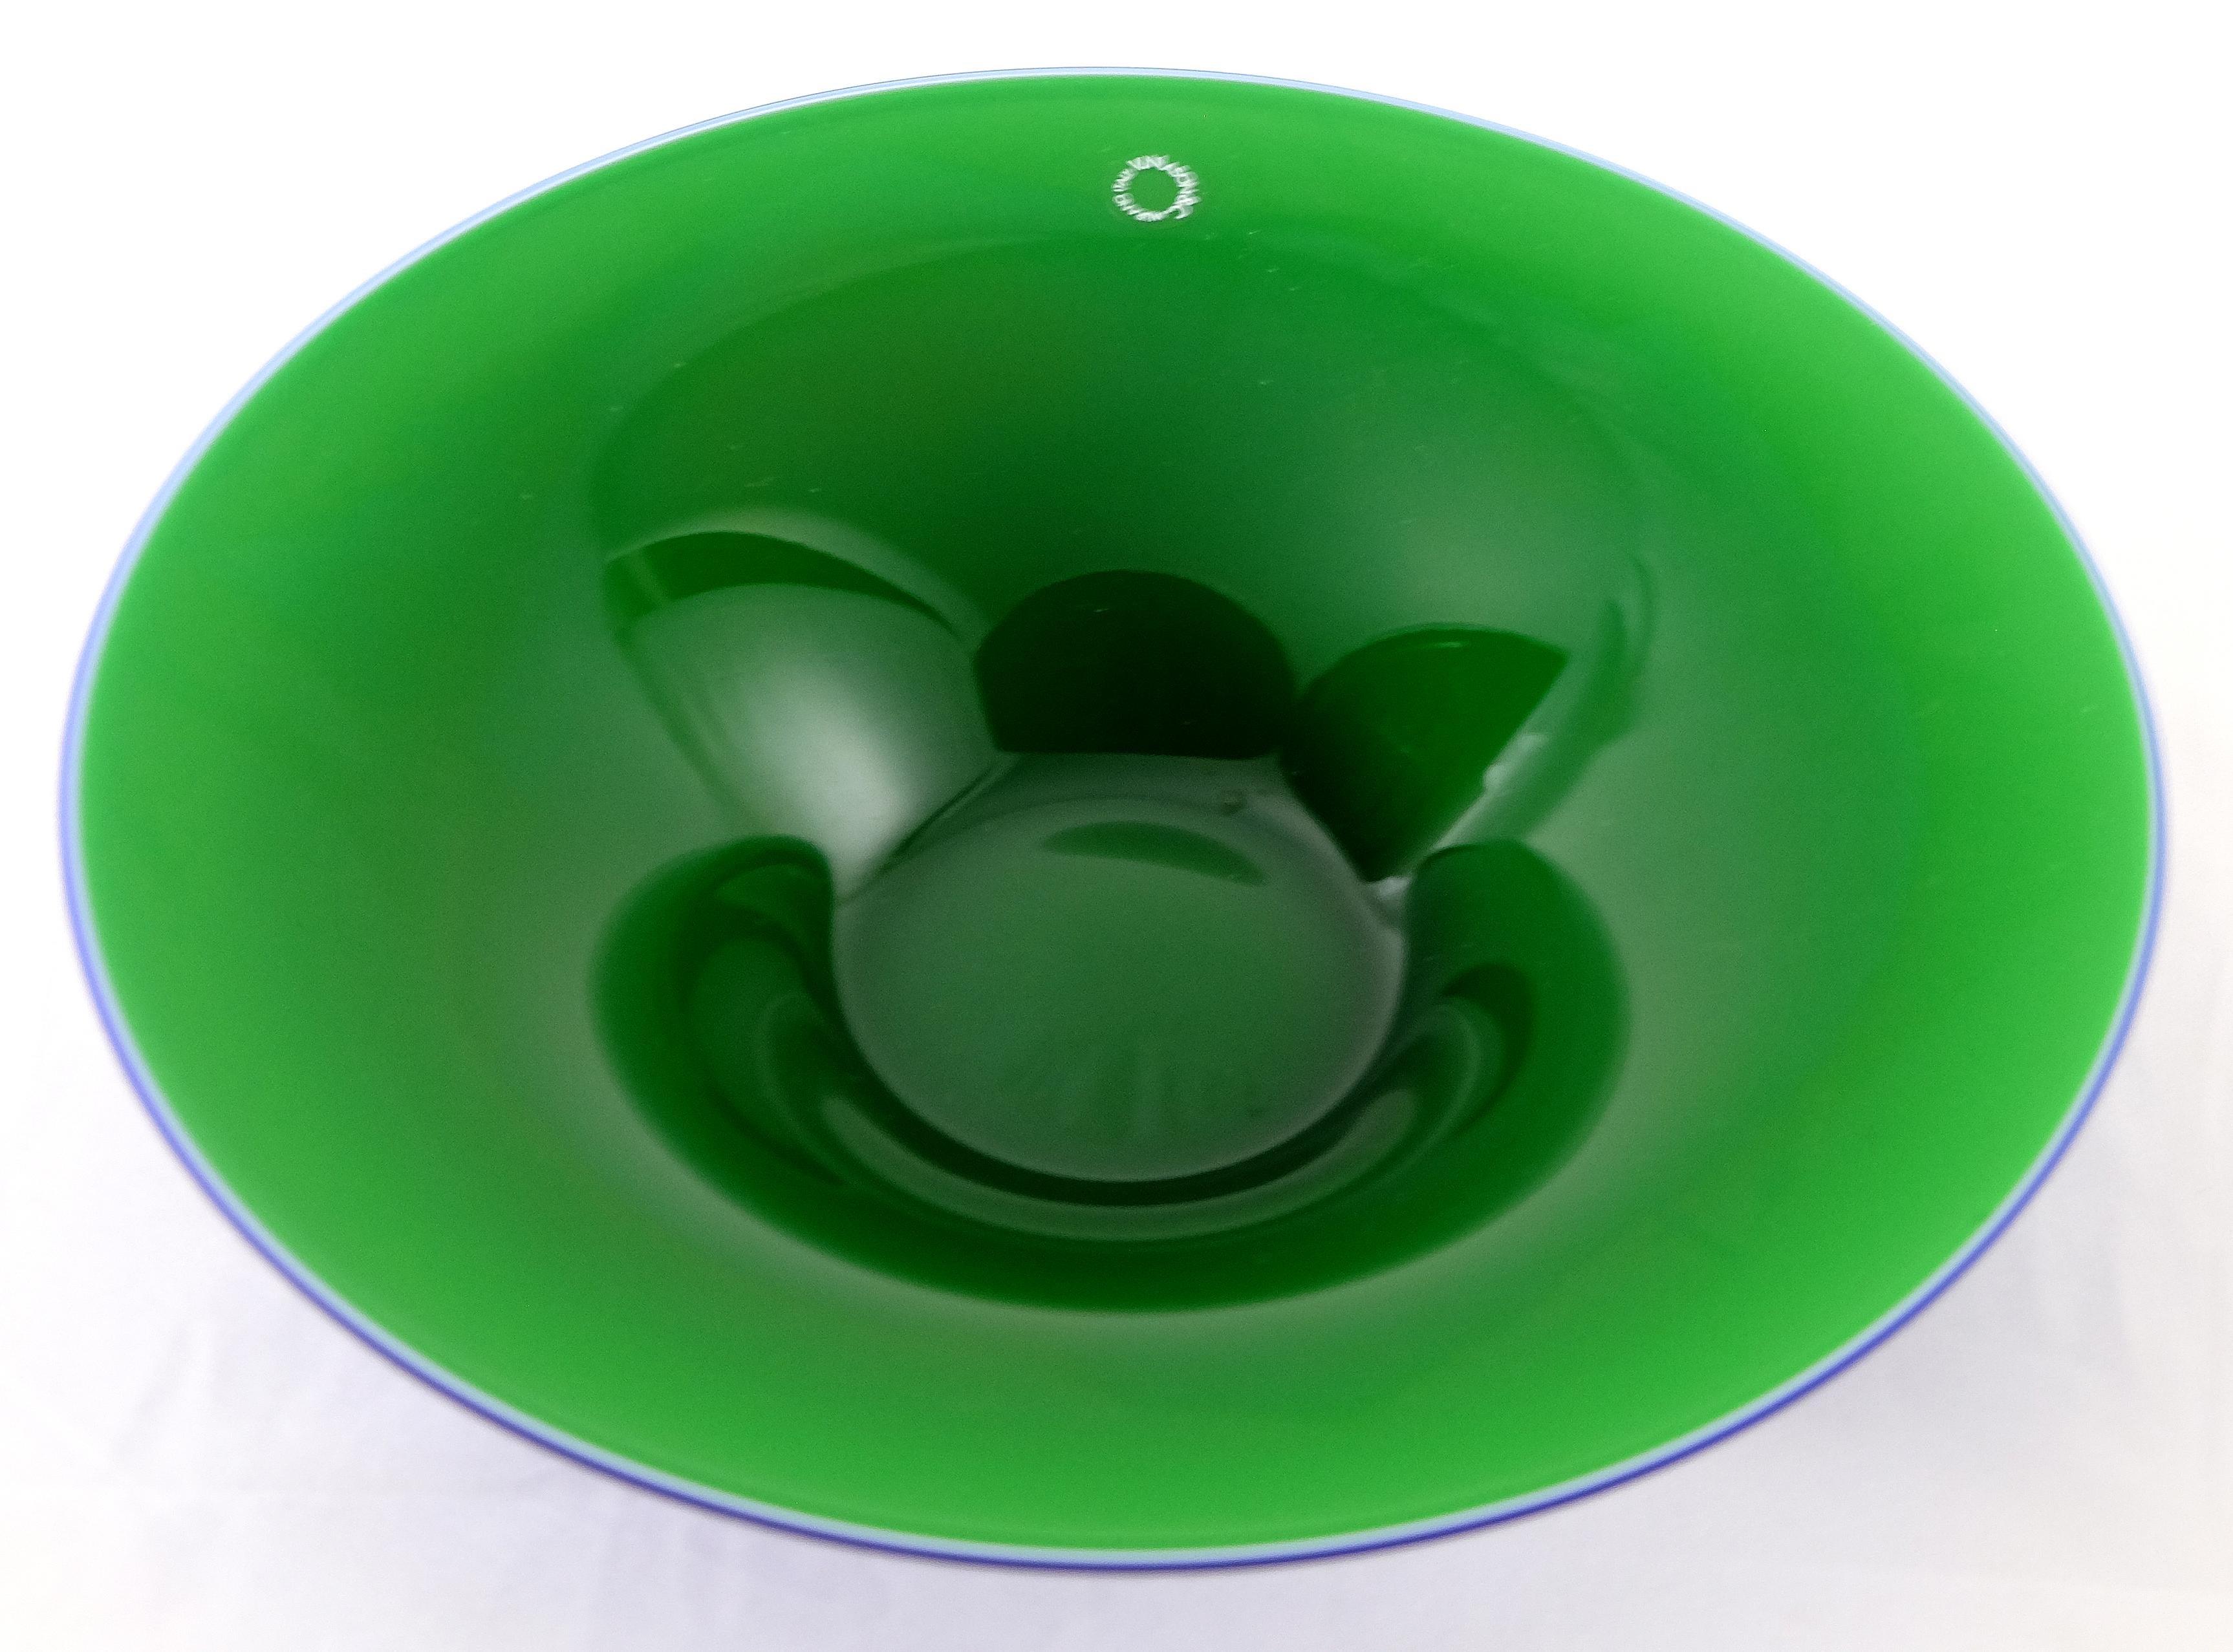 V. Nason & C. , Italy Blue and Green Blown Murano Glass Bowl 

Offered for sale is a green and blue Murano glass bowl or serving dish by V. Nason & C. The bowl retains the original label on the rim.
Vincenzo Nason established his glassworks,